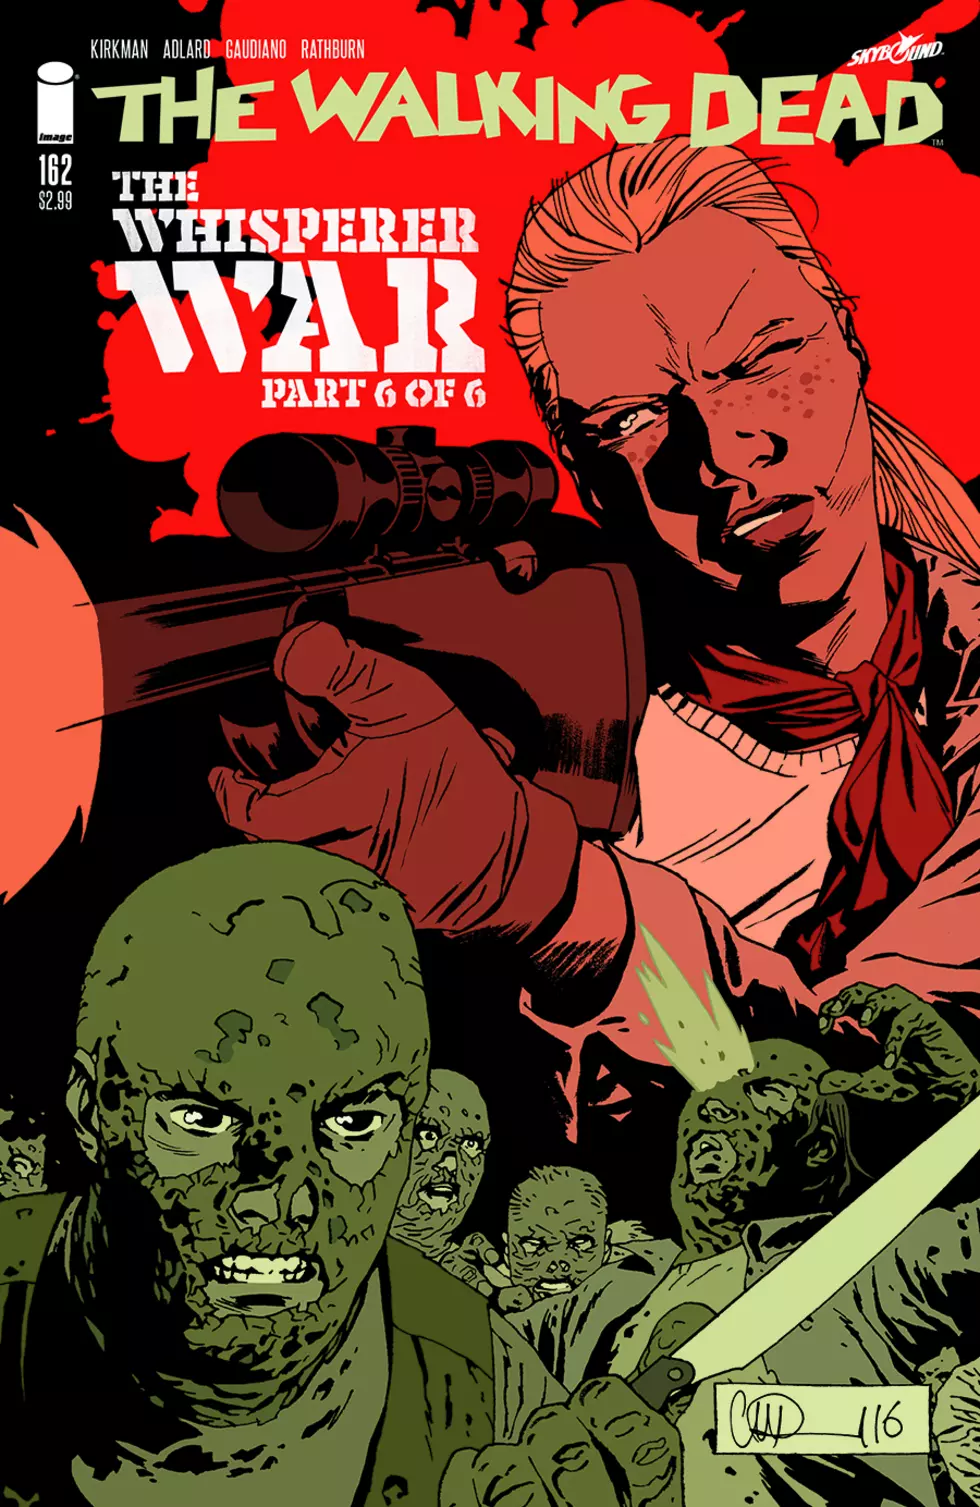 The Walking Dead #162 Review!